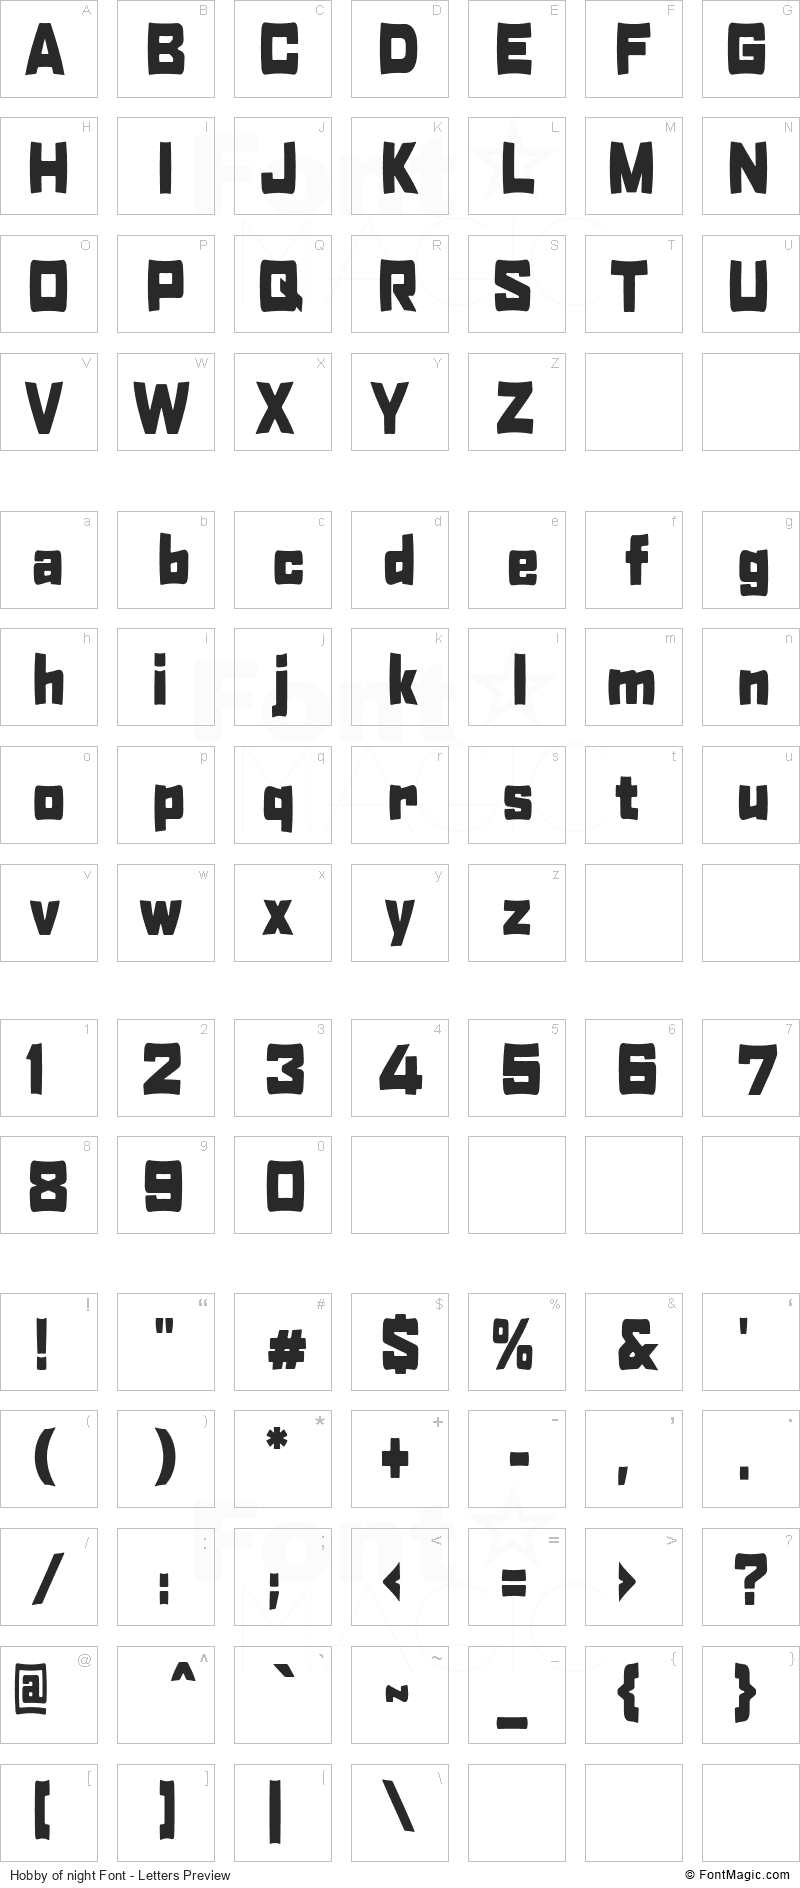 Hobby of night Font - All Latters Preview Chart